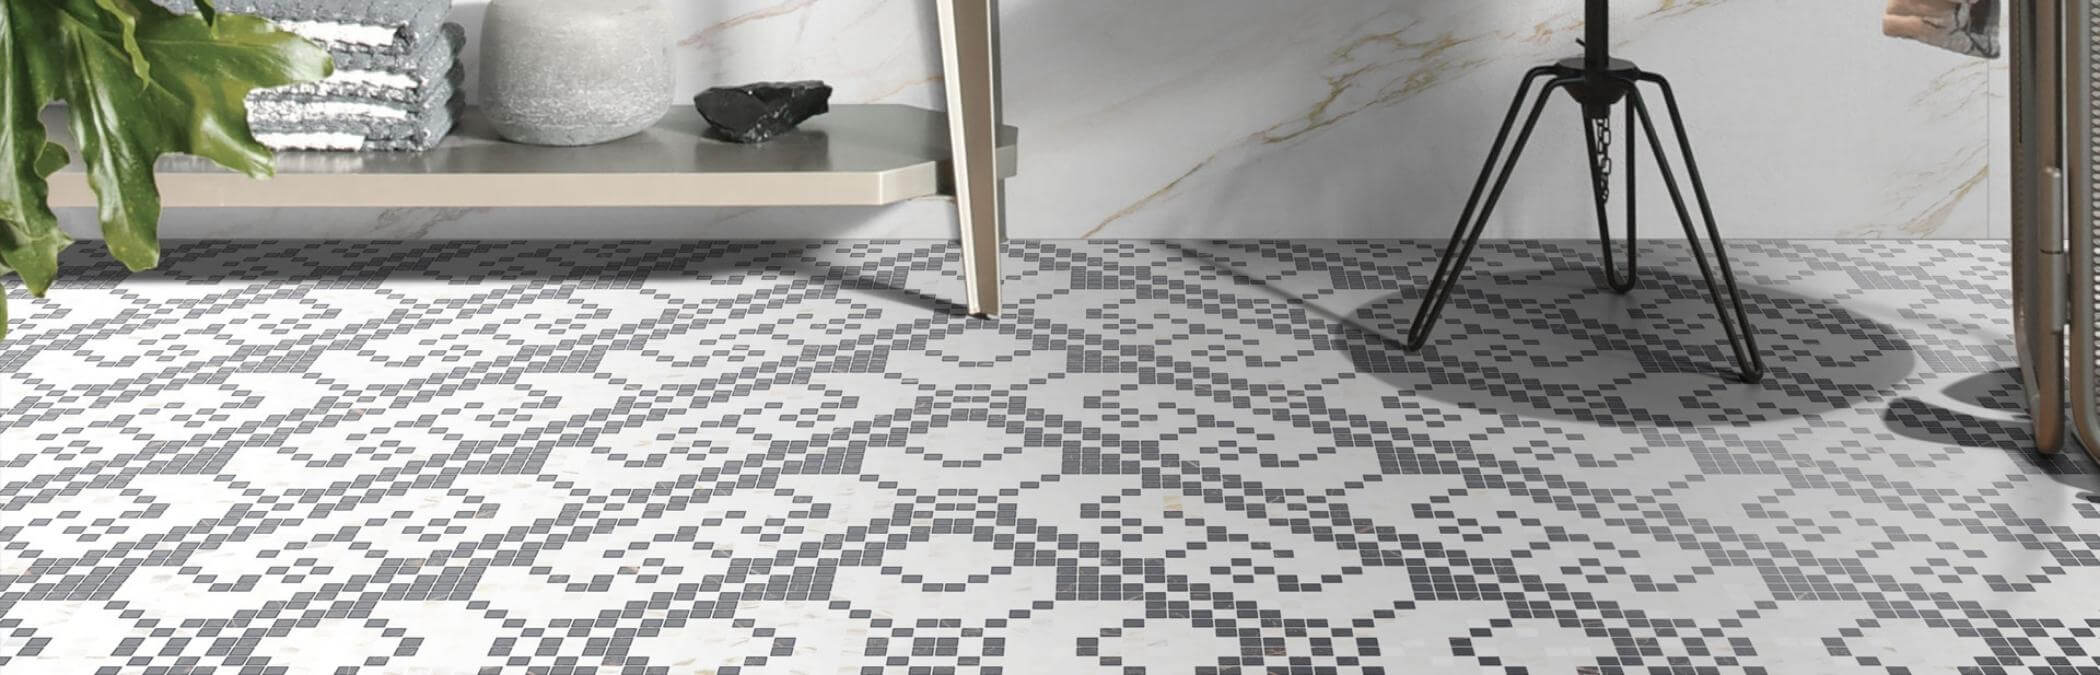 Floor Tiles shown in a home setting